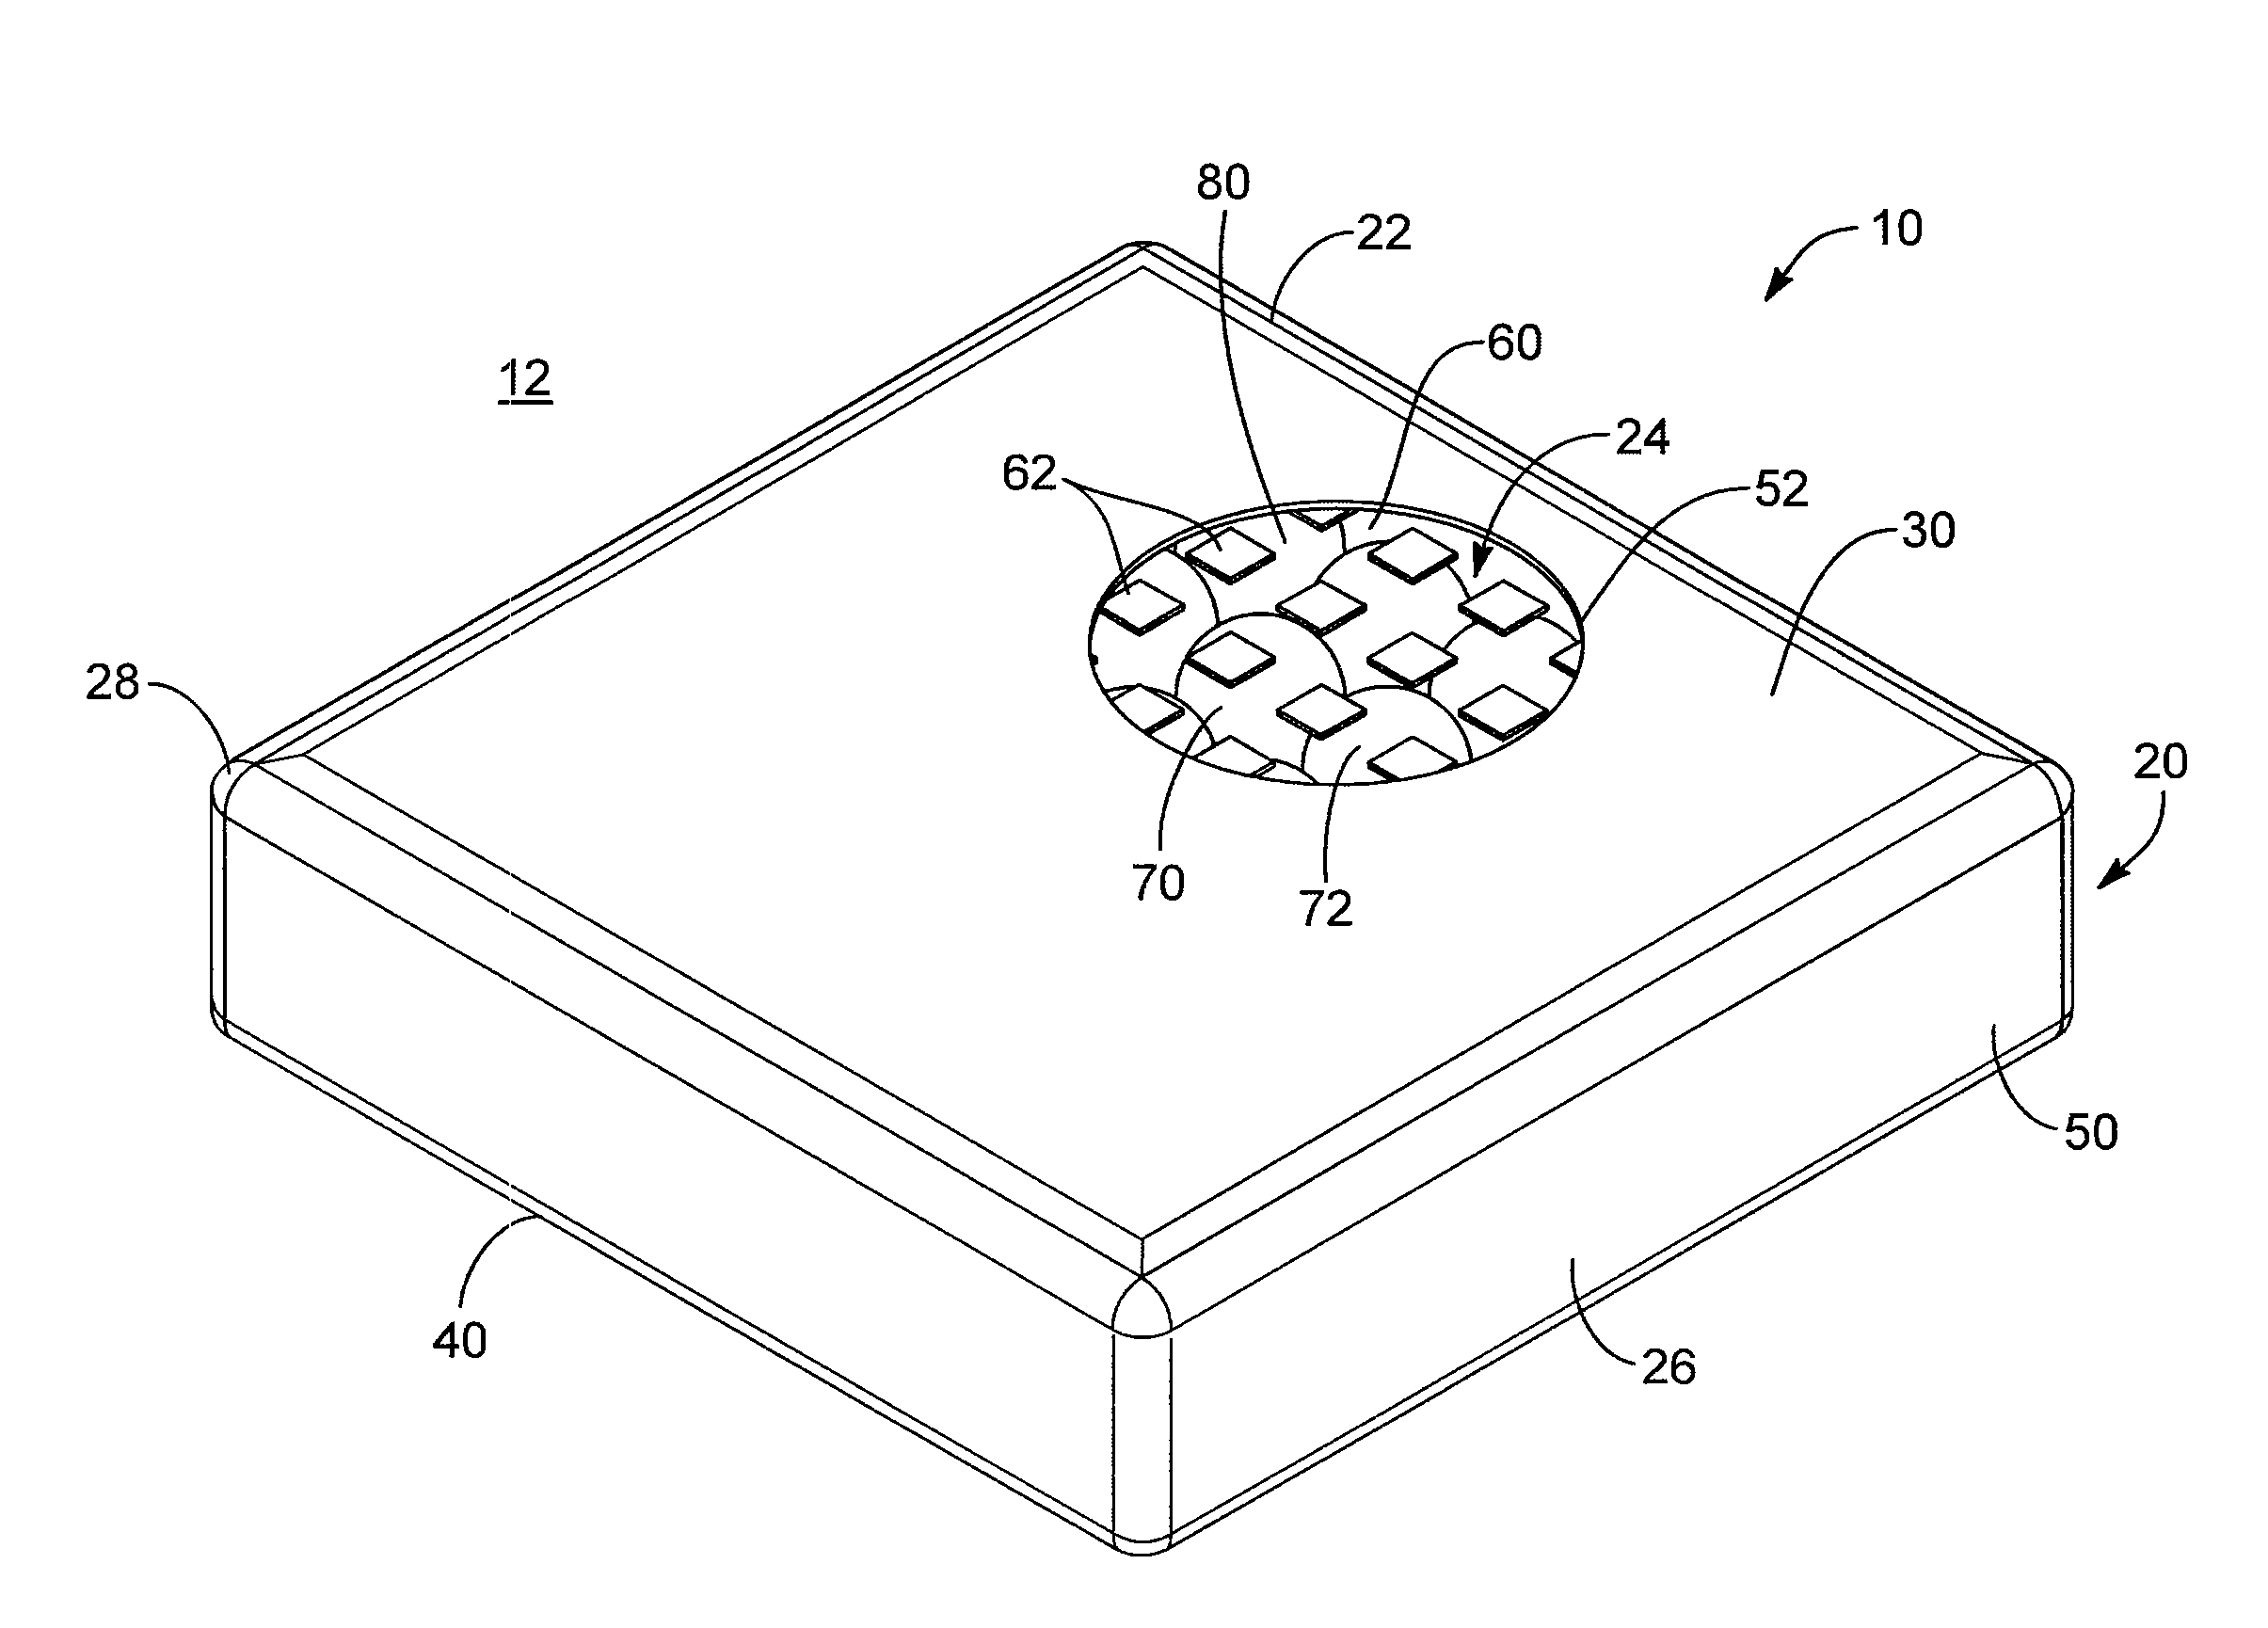 Systems and methods for providing a self deflating cushion